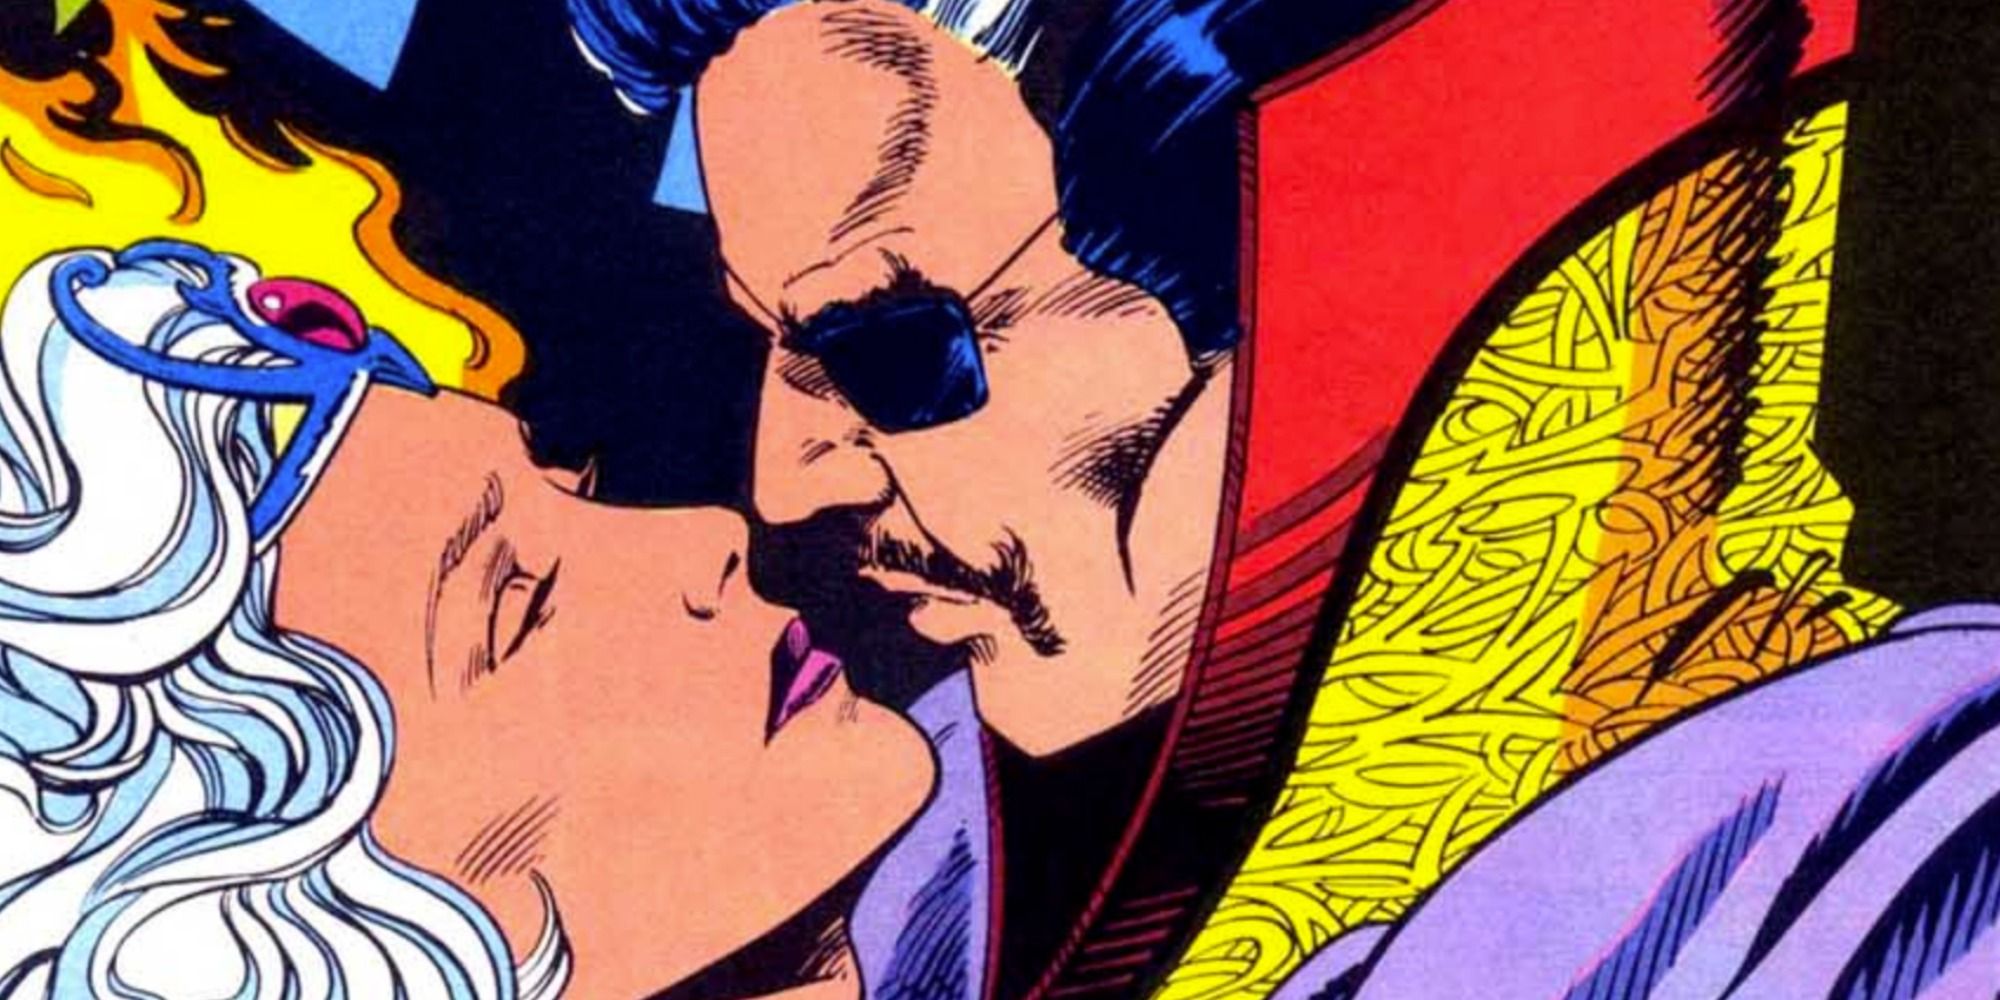 Clea and Doctor Strange embrace in Marvel Comics.